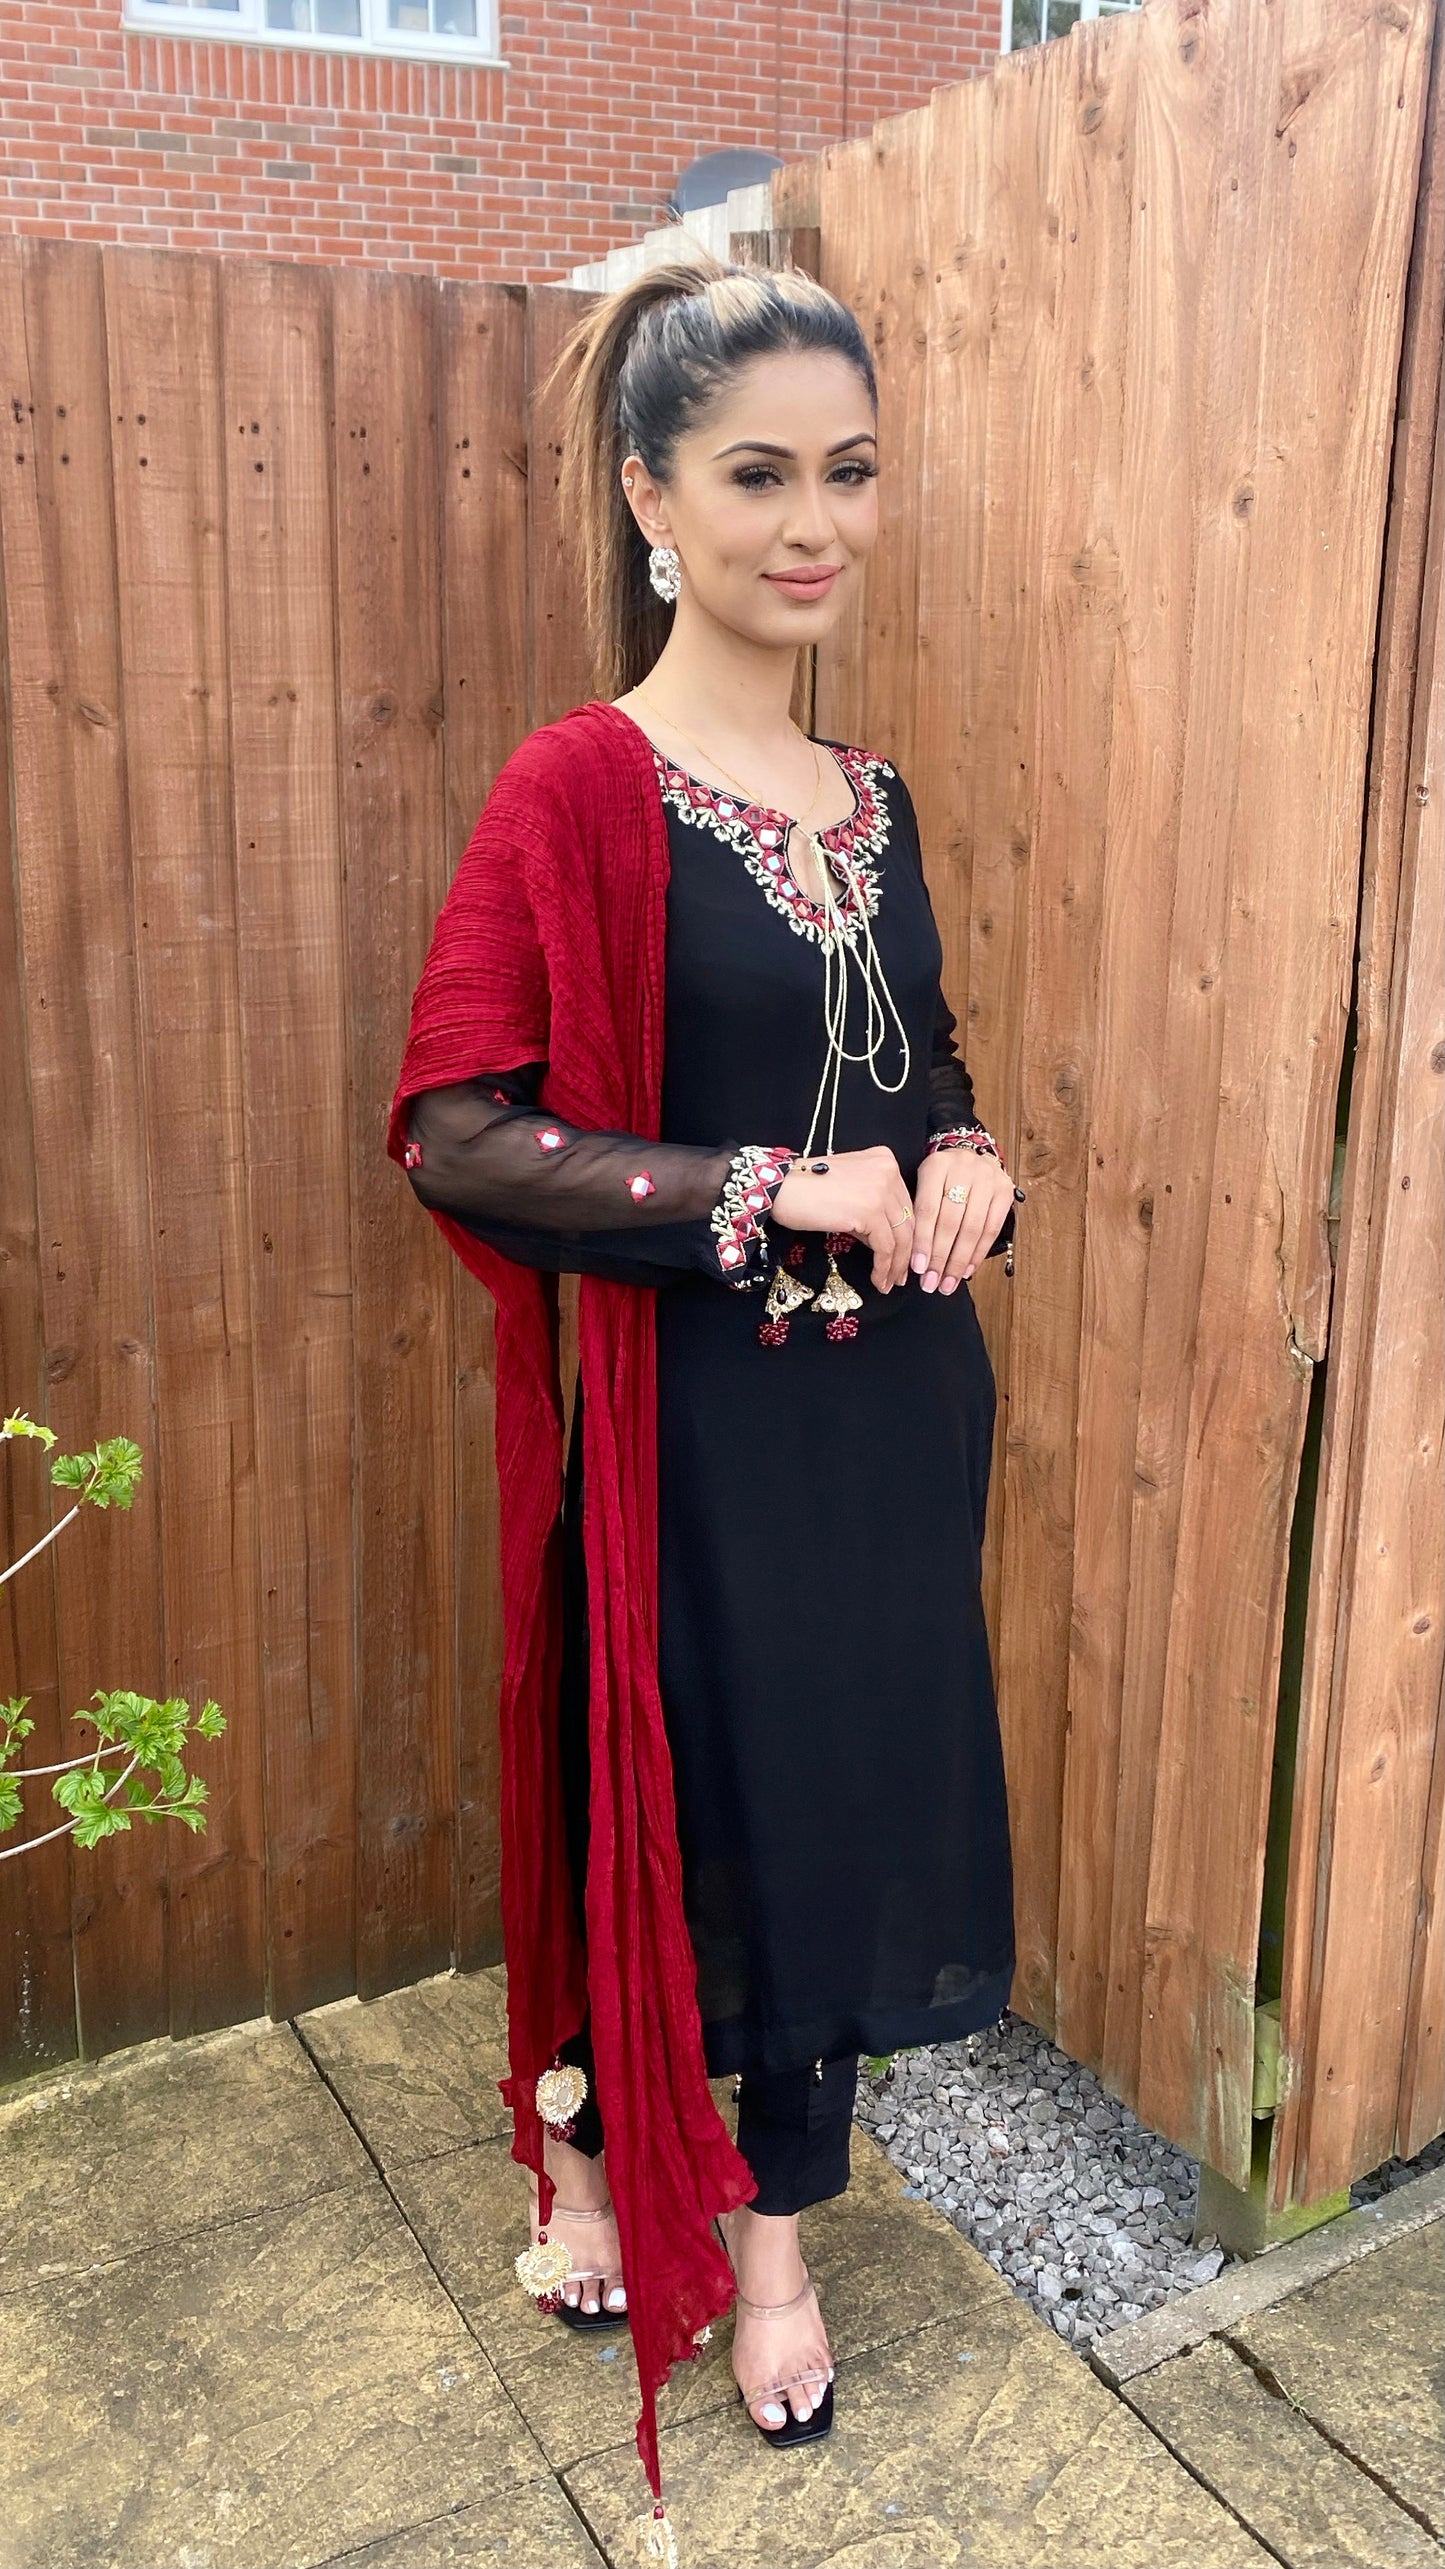 FARAH - Black 3 Piece Chiffon Suit with Mirror Details and Crushed Dupatta